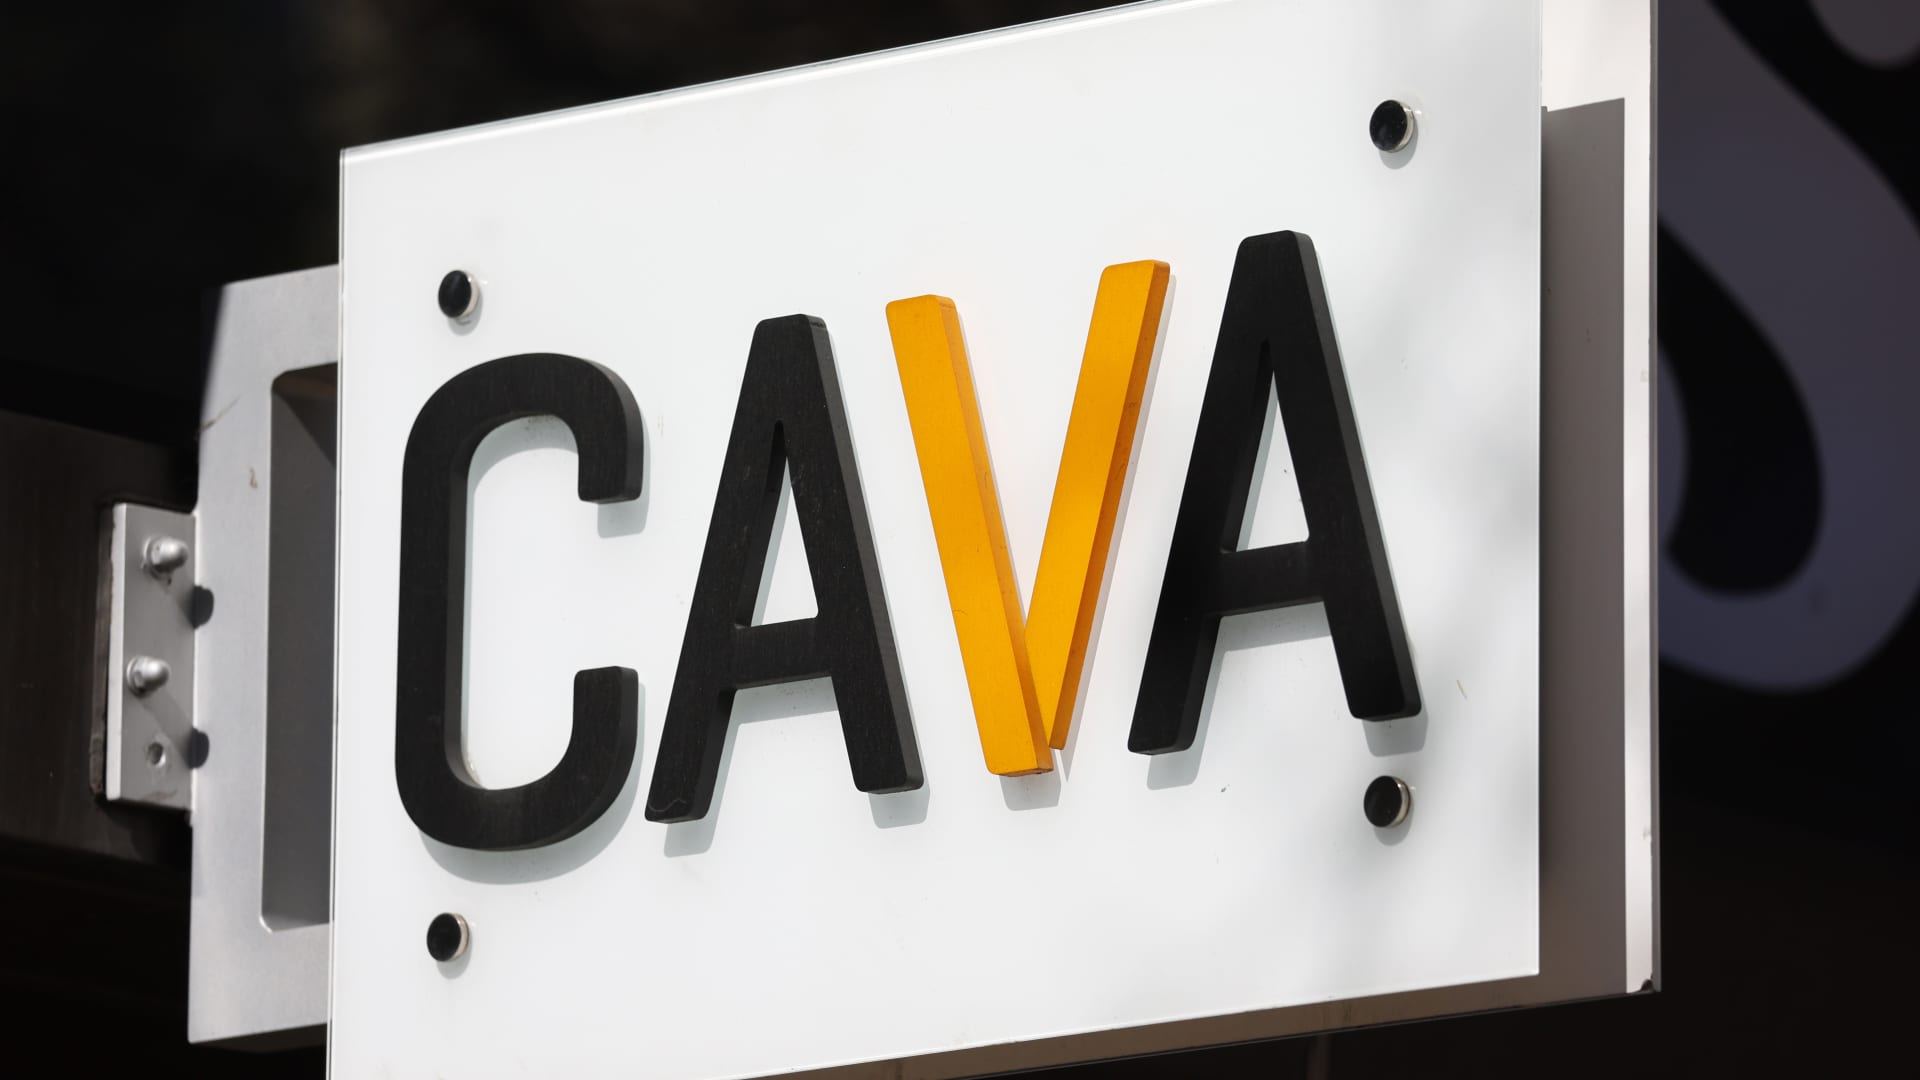 Cava prices IPO at $22 per share, above stated range